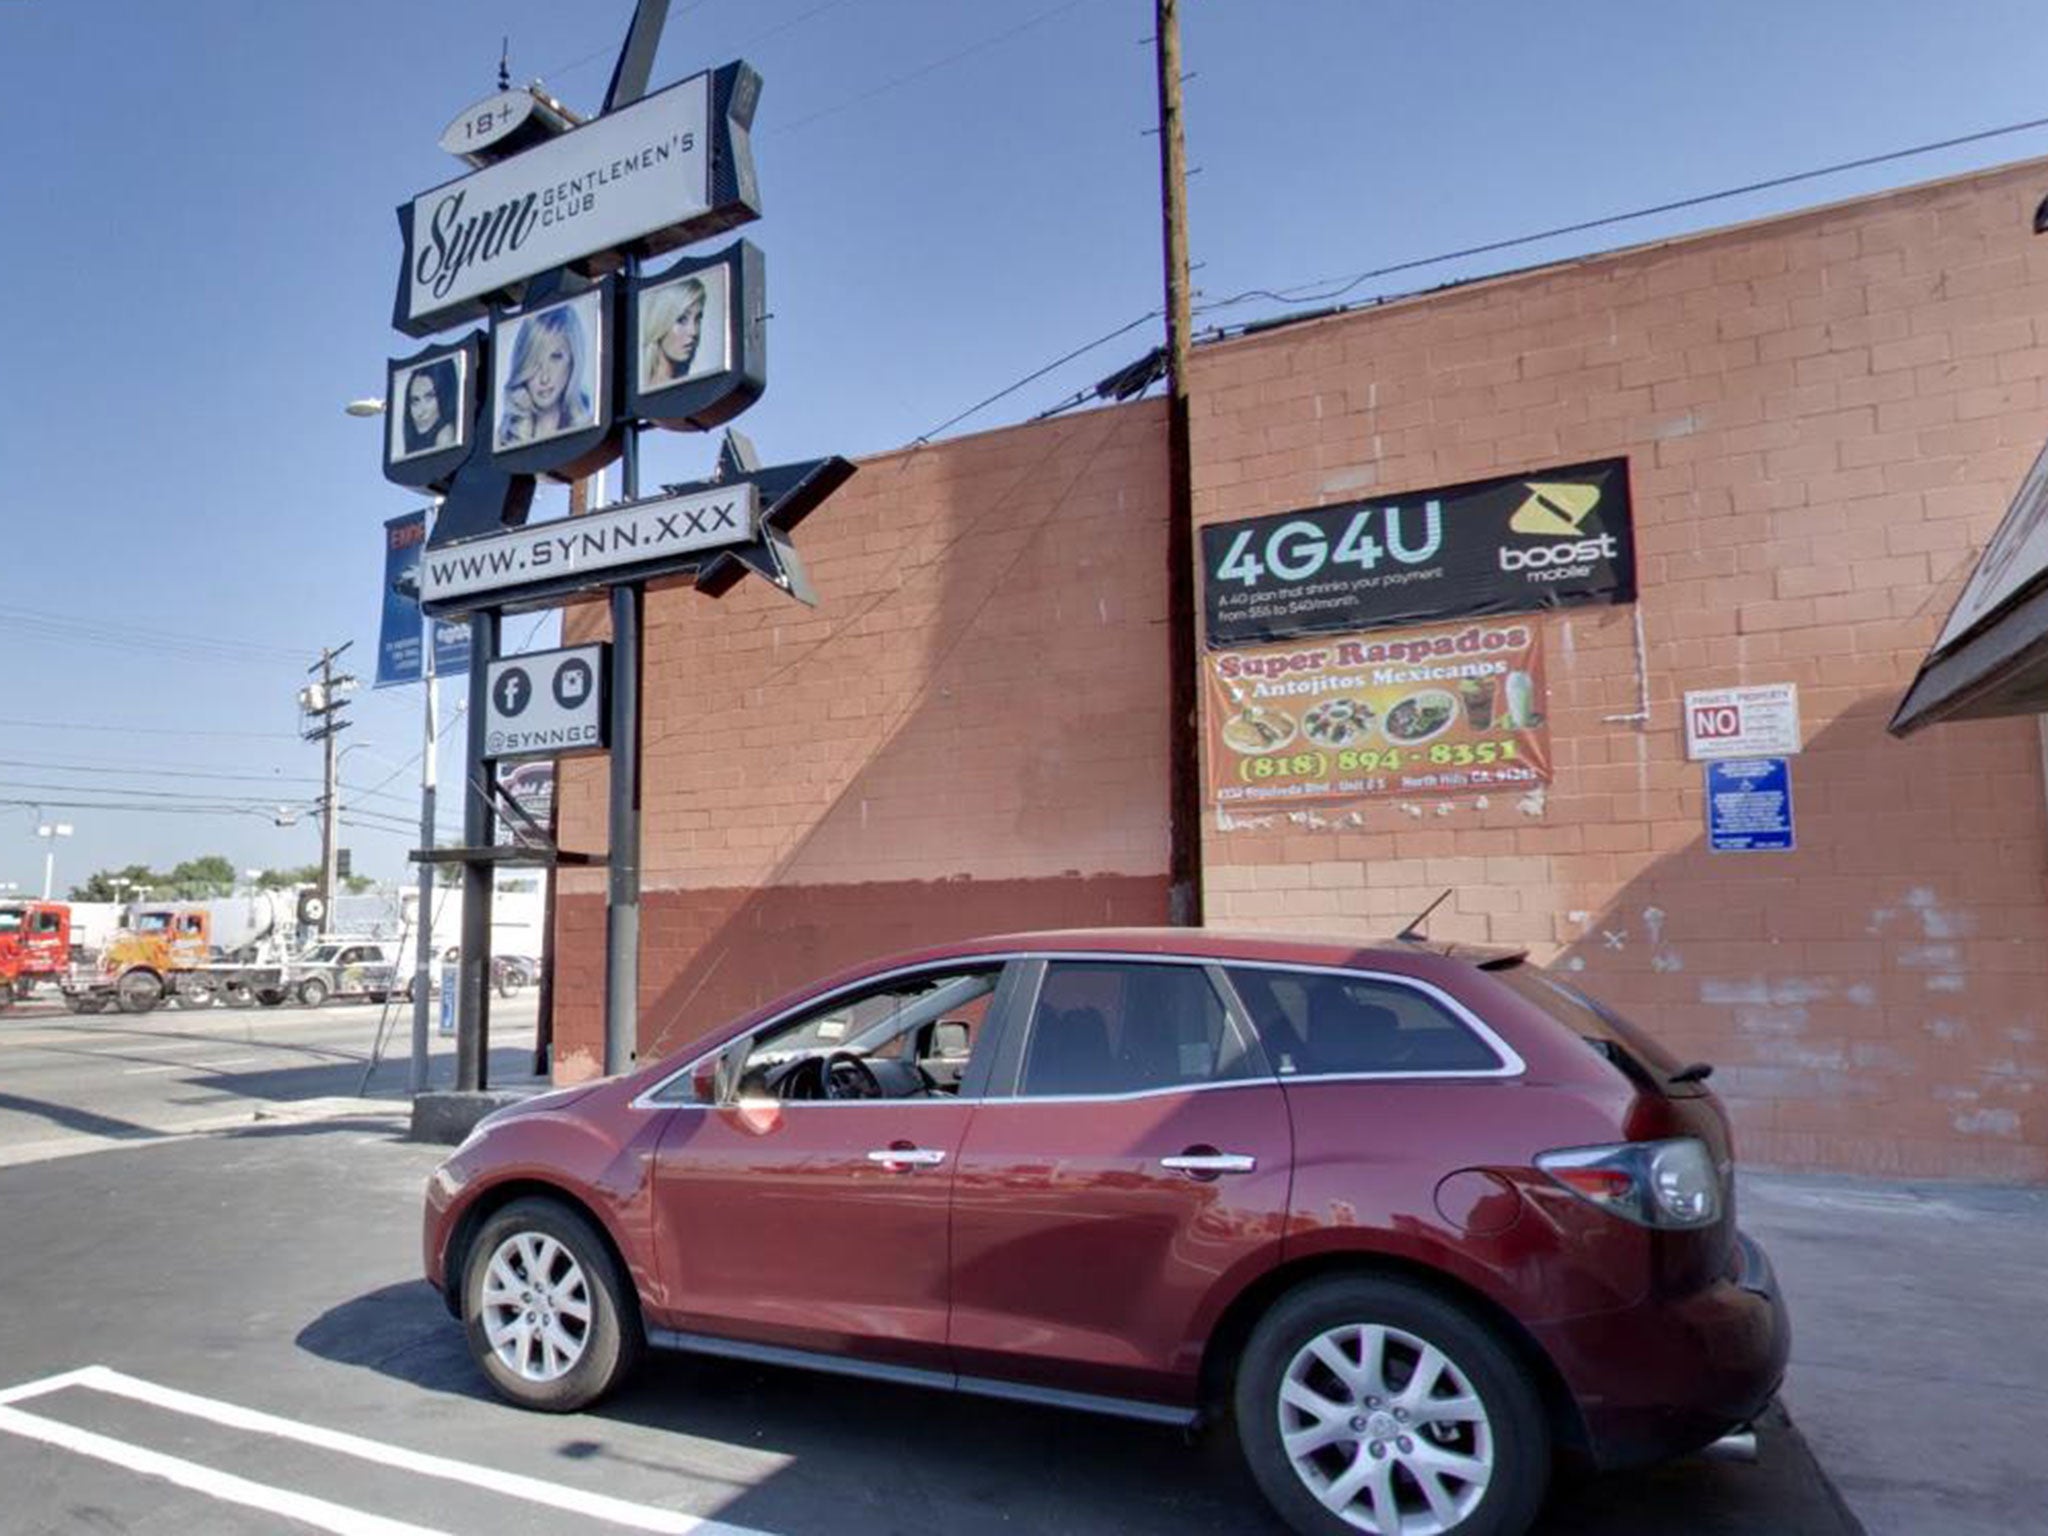 The baby was found in a car parked at Synn Gentleman’s Club in North Hills, Los Angeles